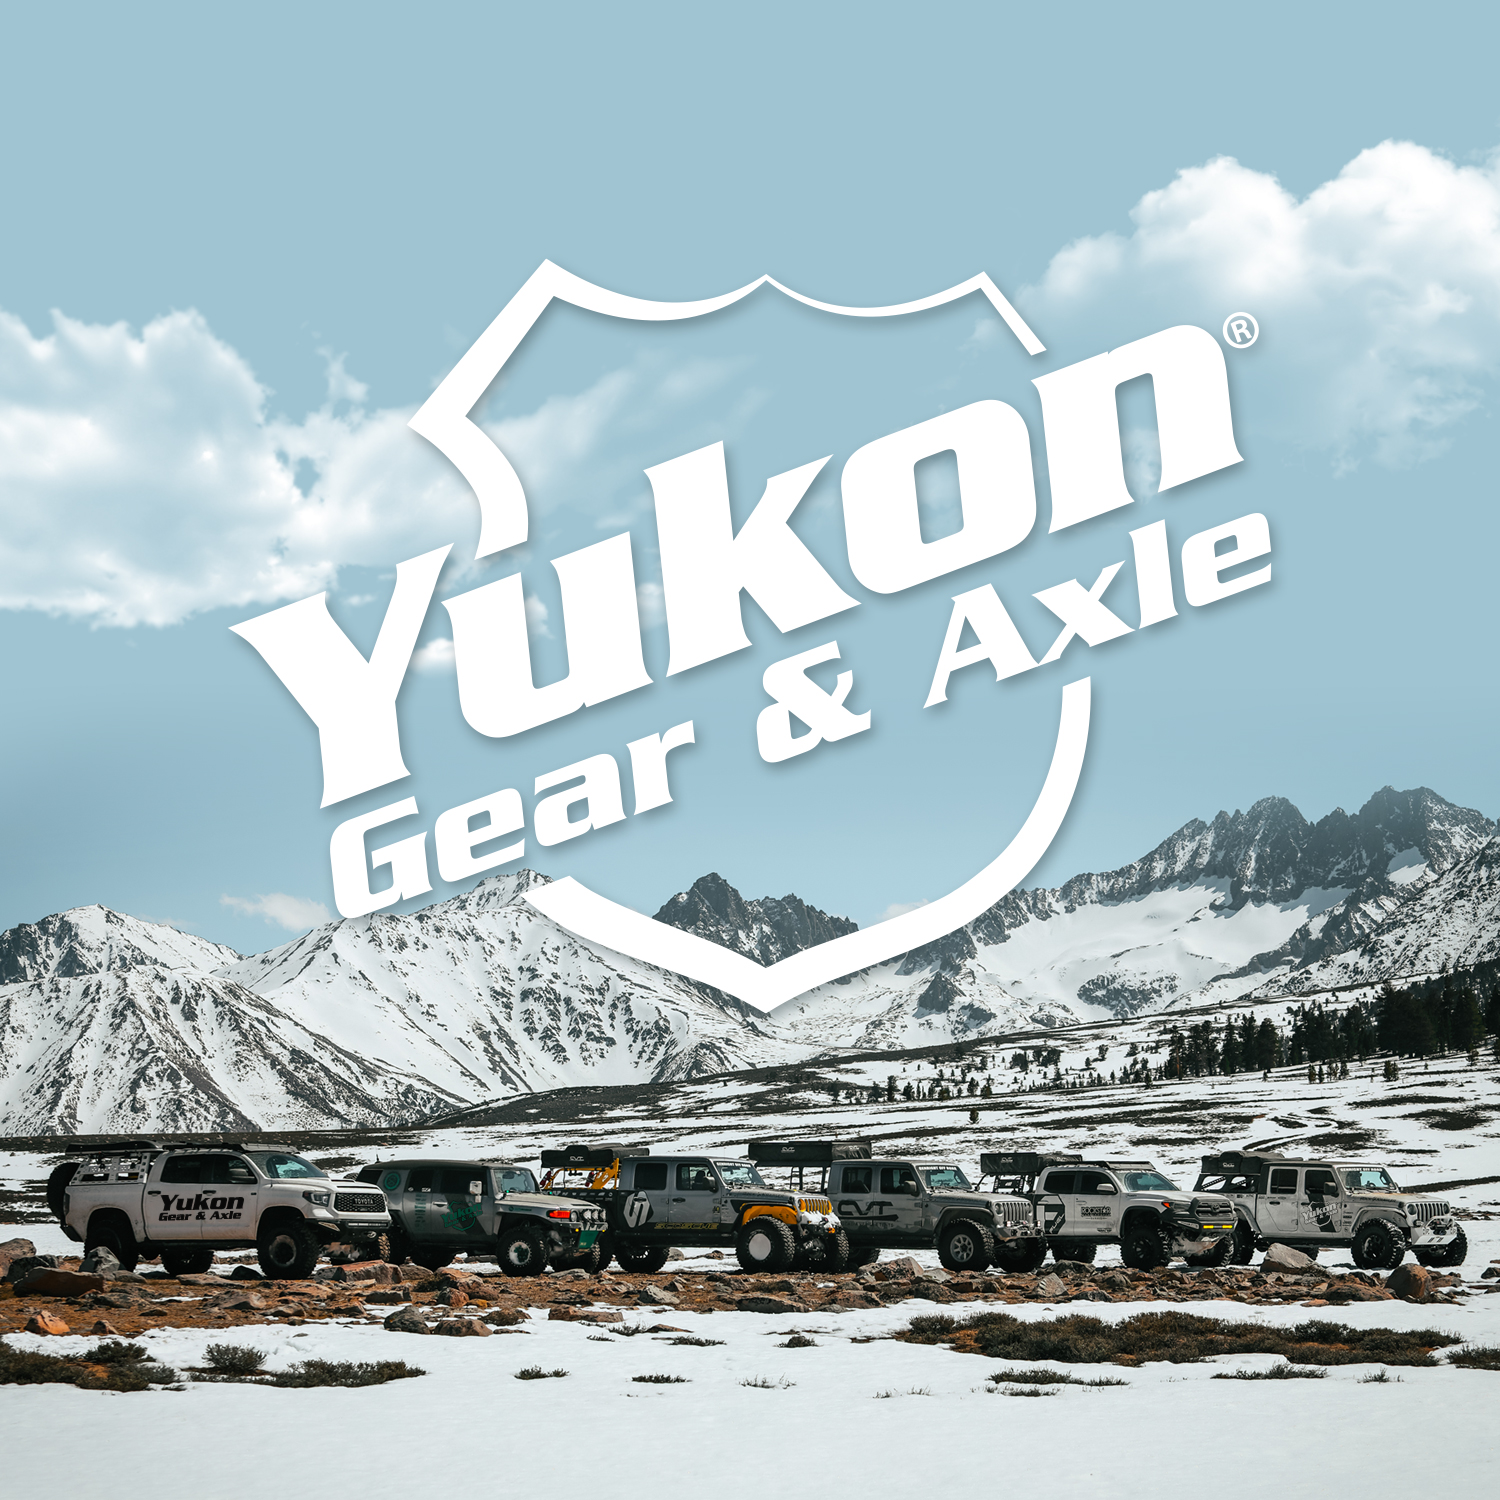 Yukon yoke for Chrysler 8.75" with 10 spline pinion and a 7260 U/Joint size 